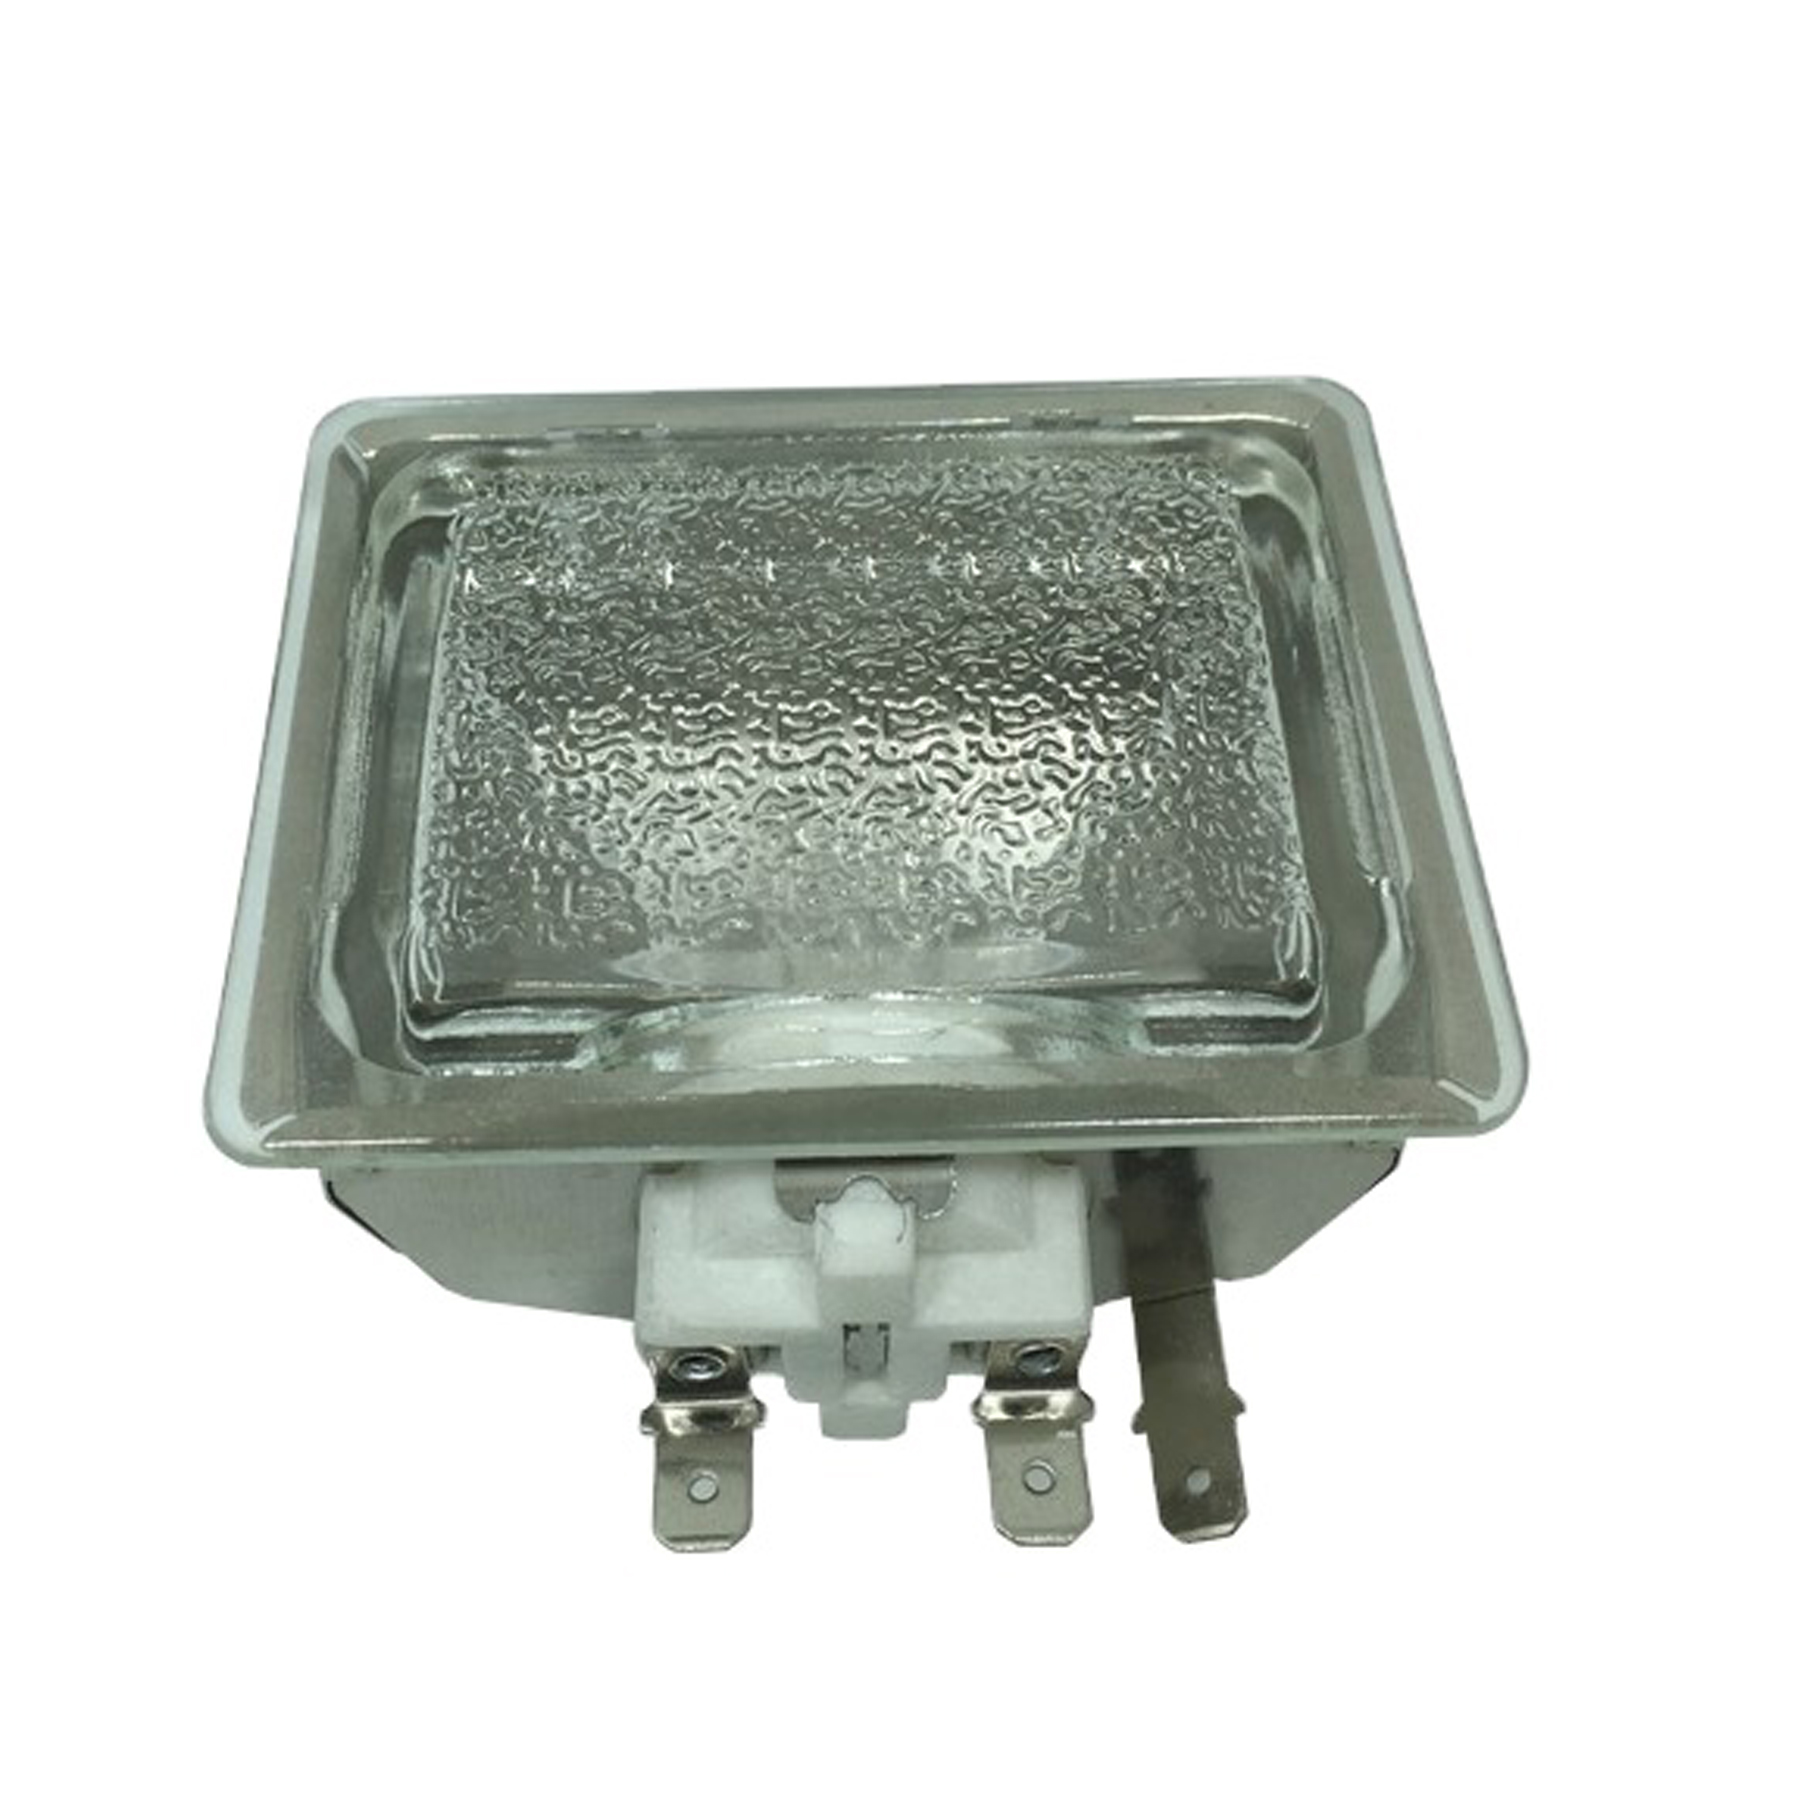 E14 G9 Oven Lamp Holder Electrical Oven Parts